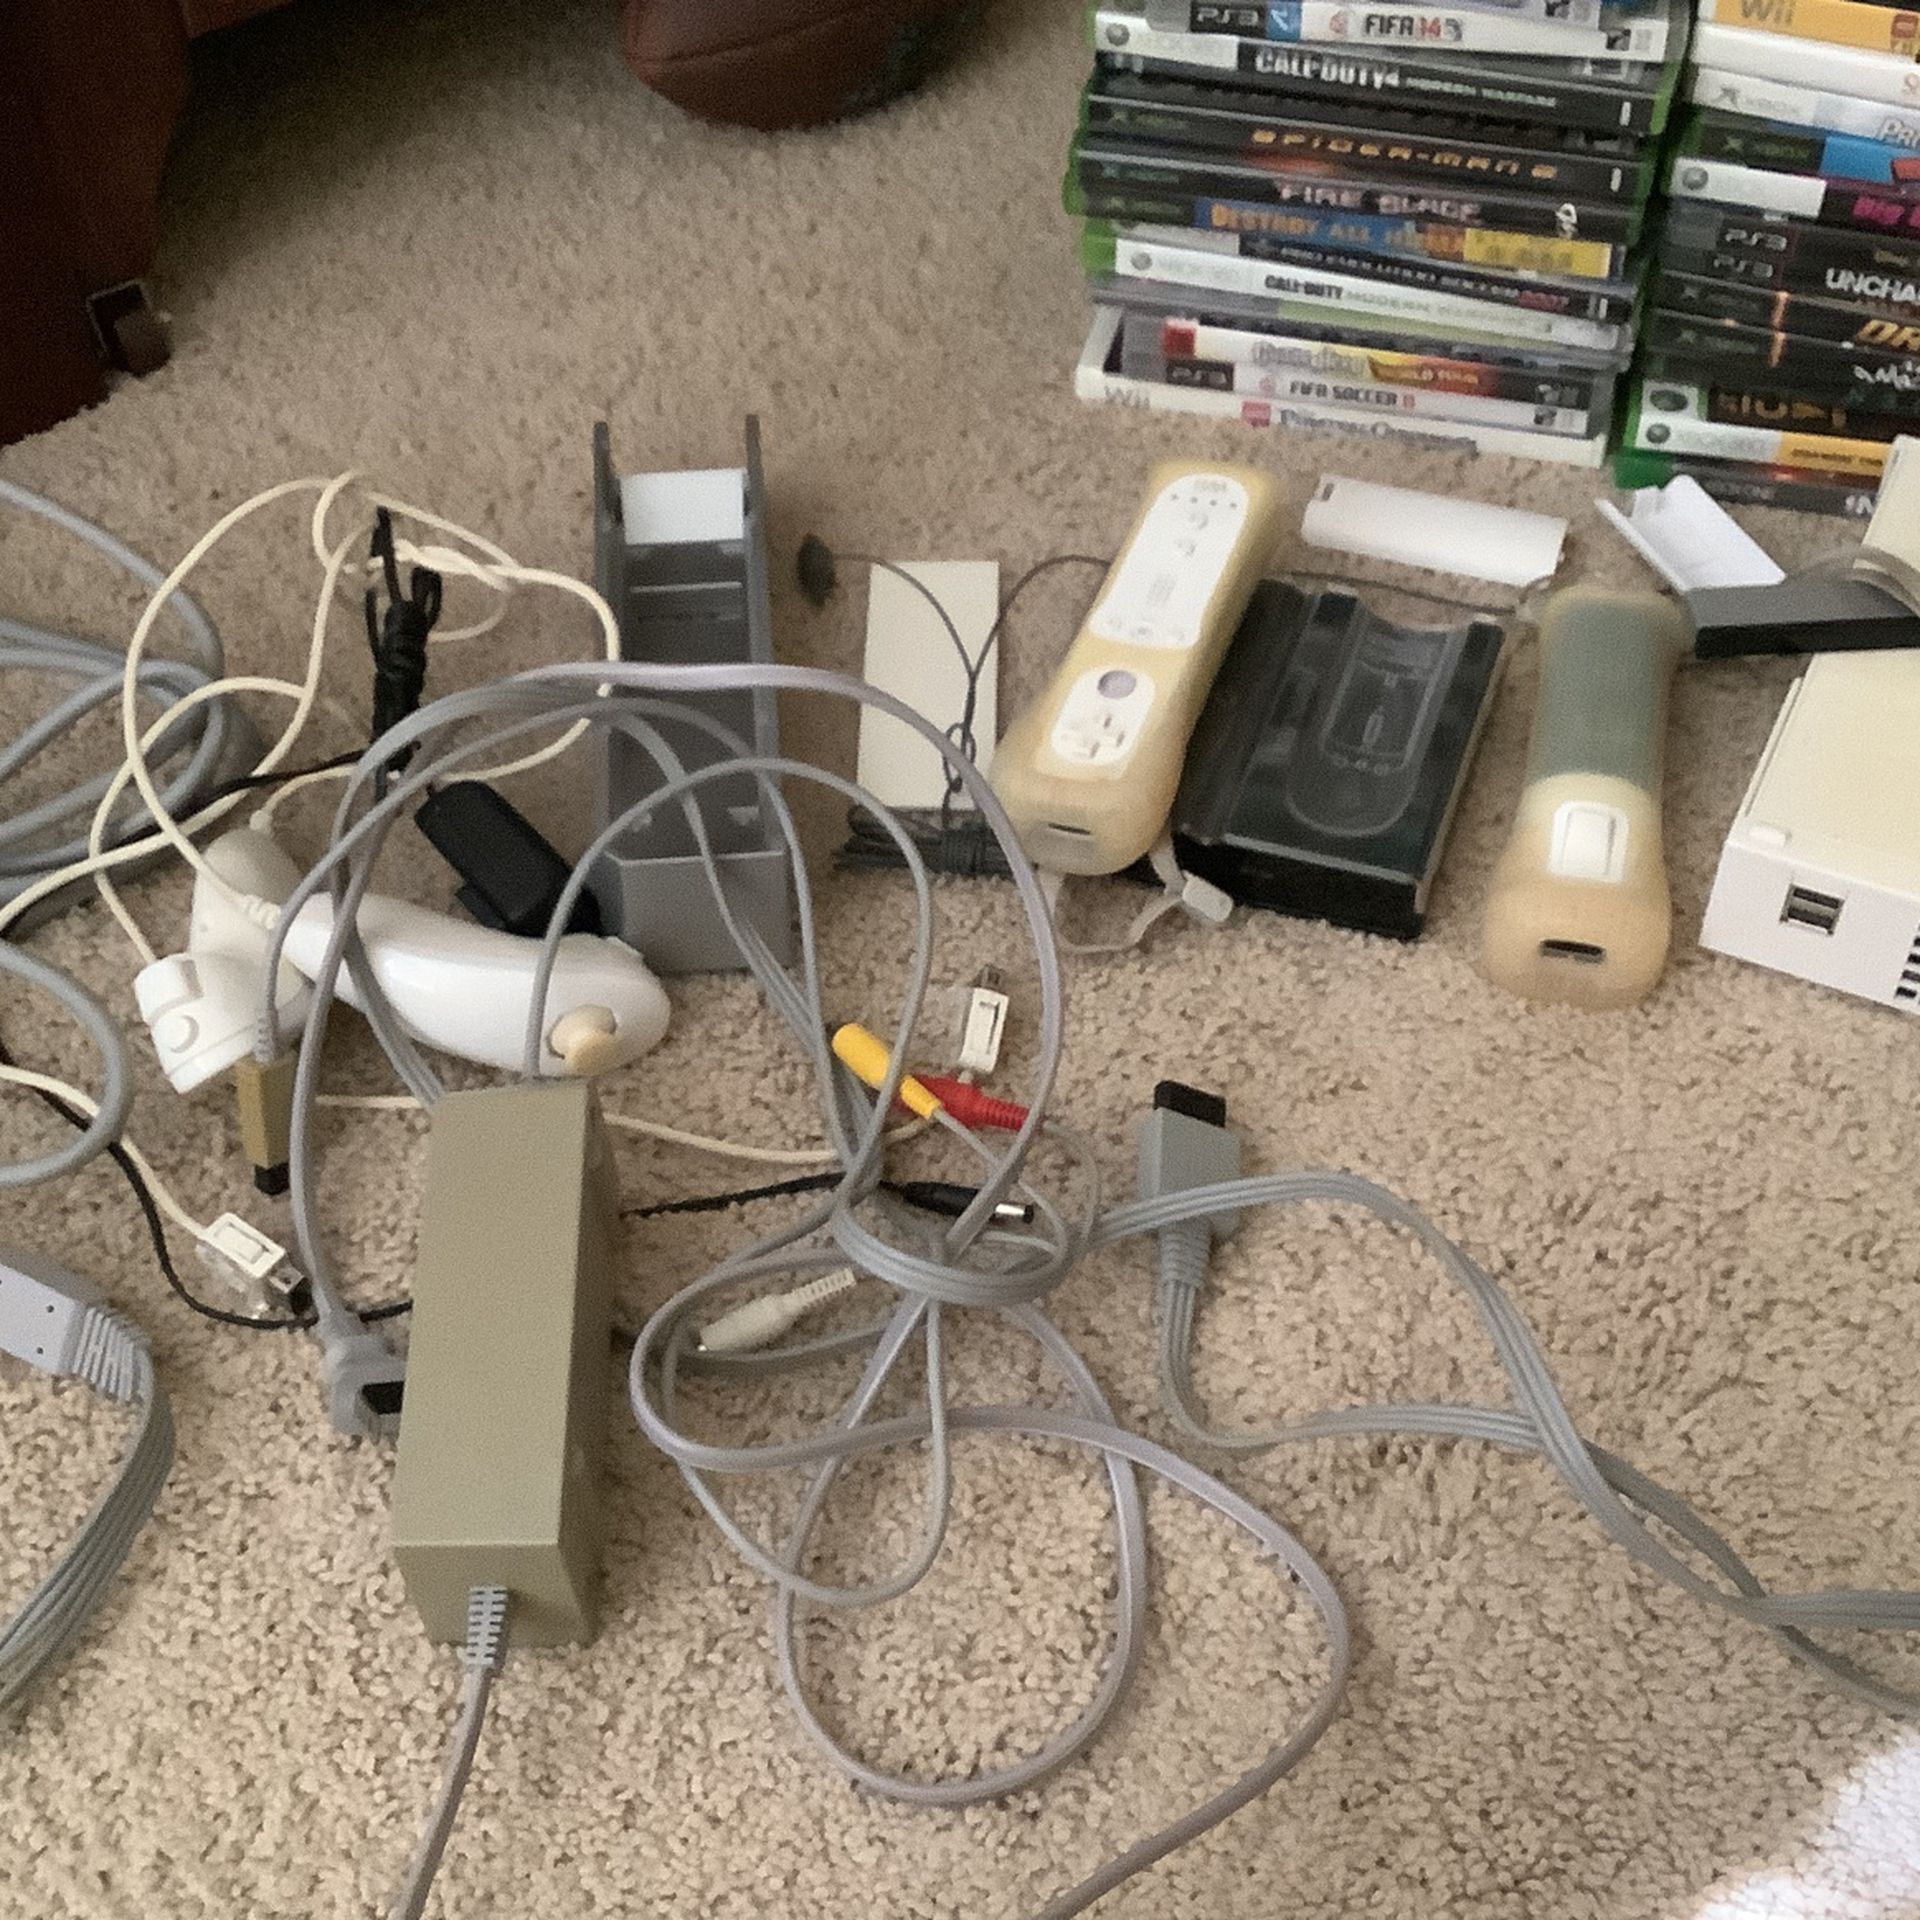 Wii Console And Bulk Of PlayStation And Xbox Games